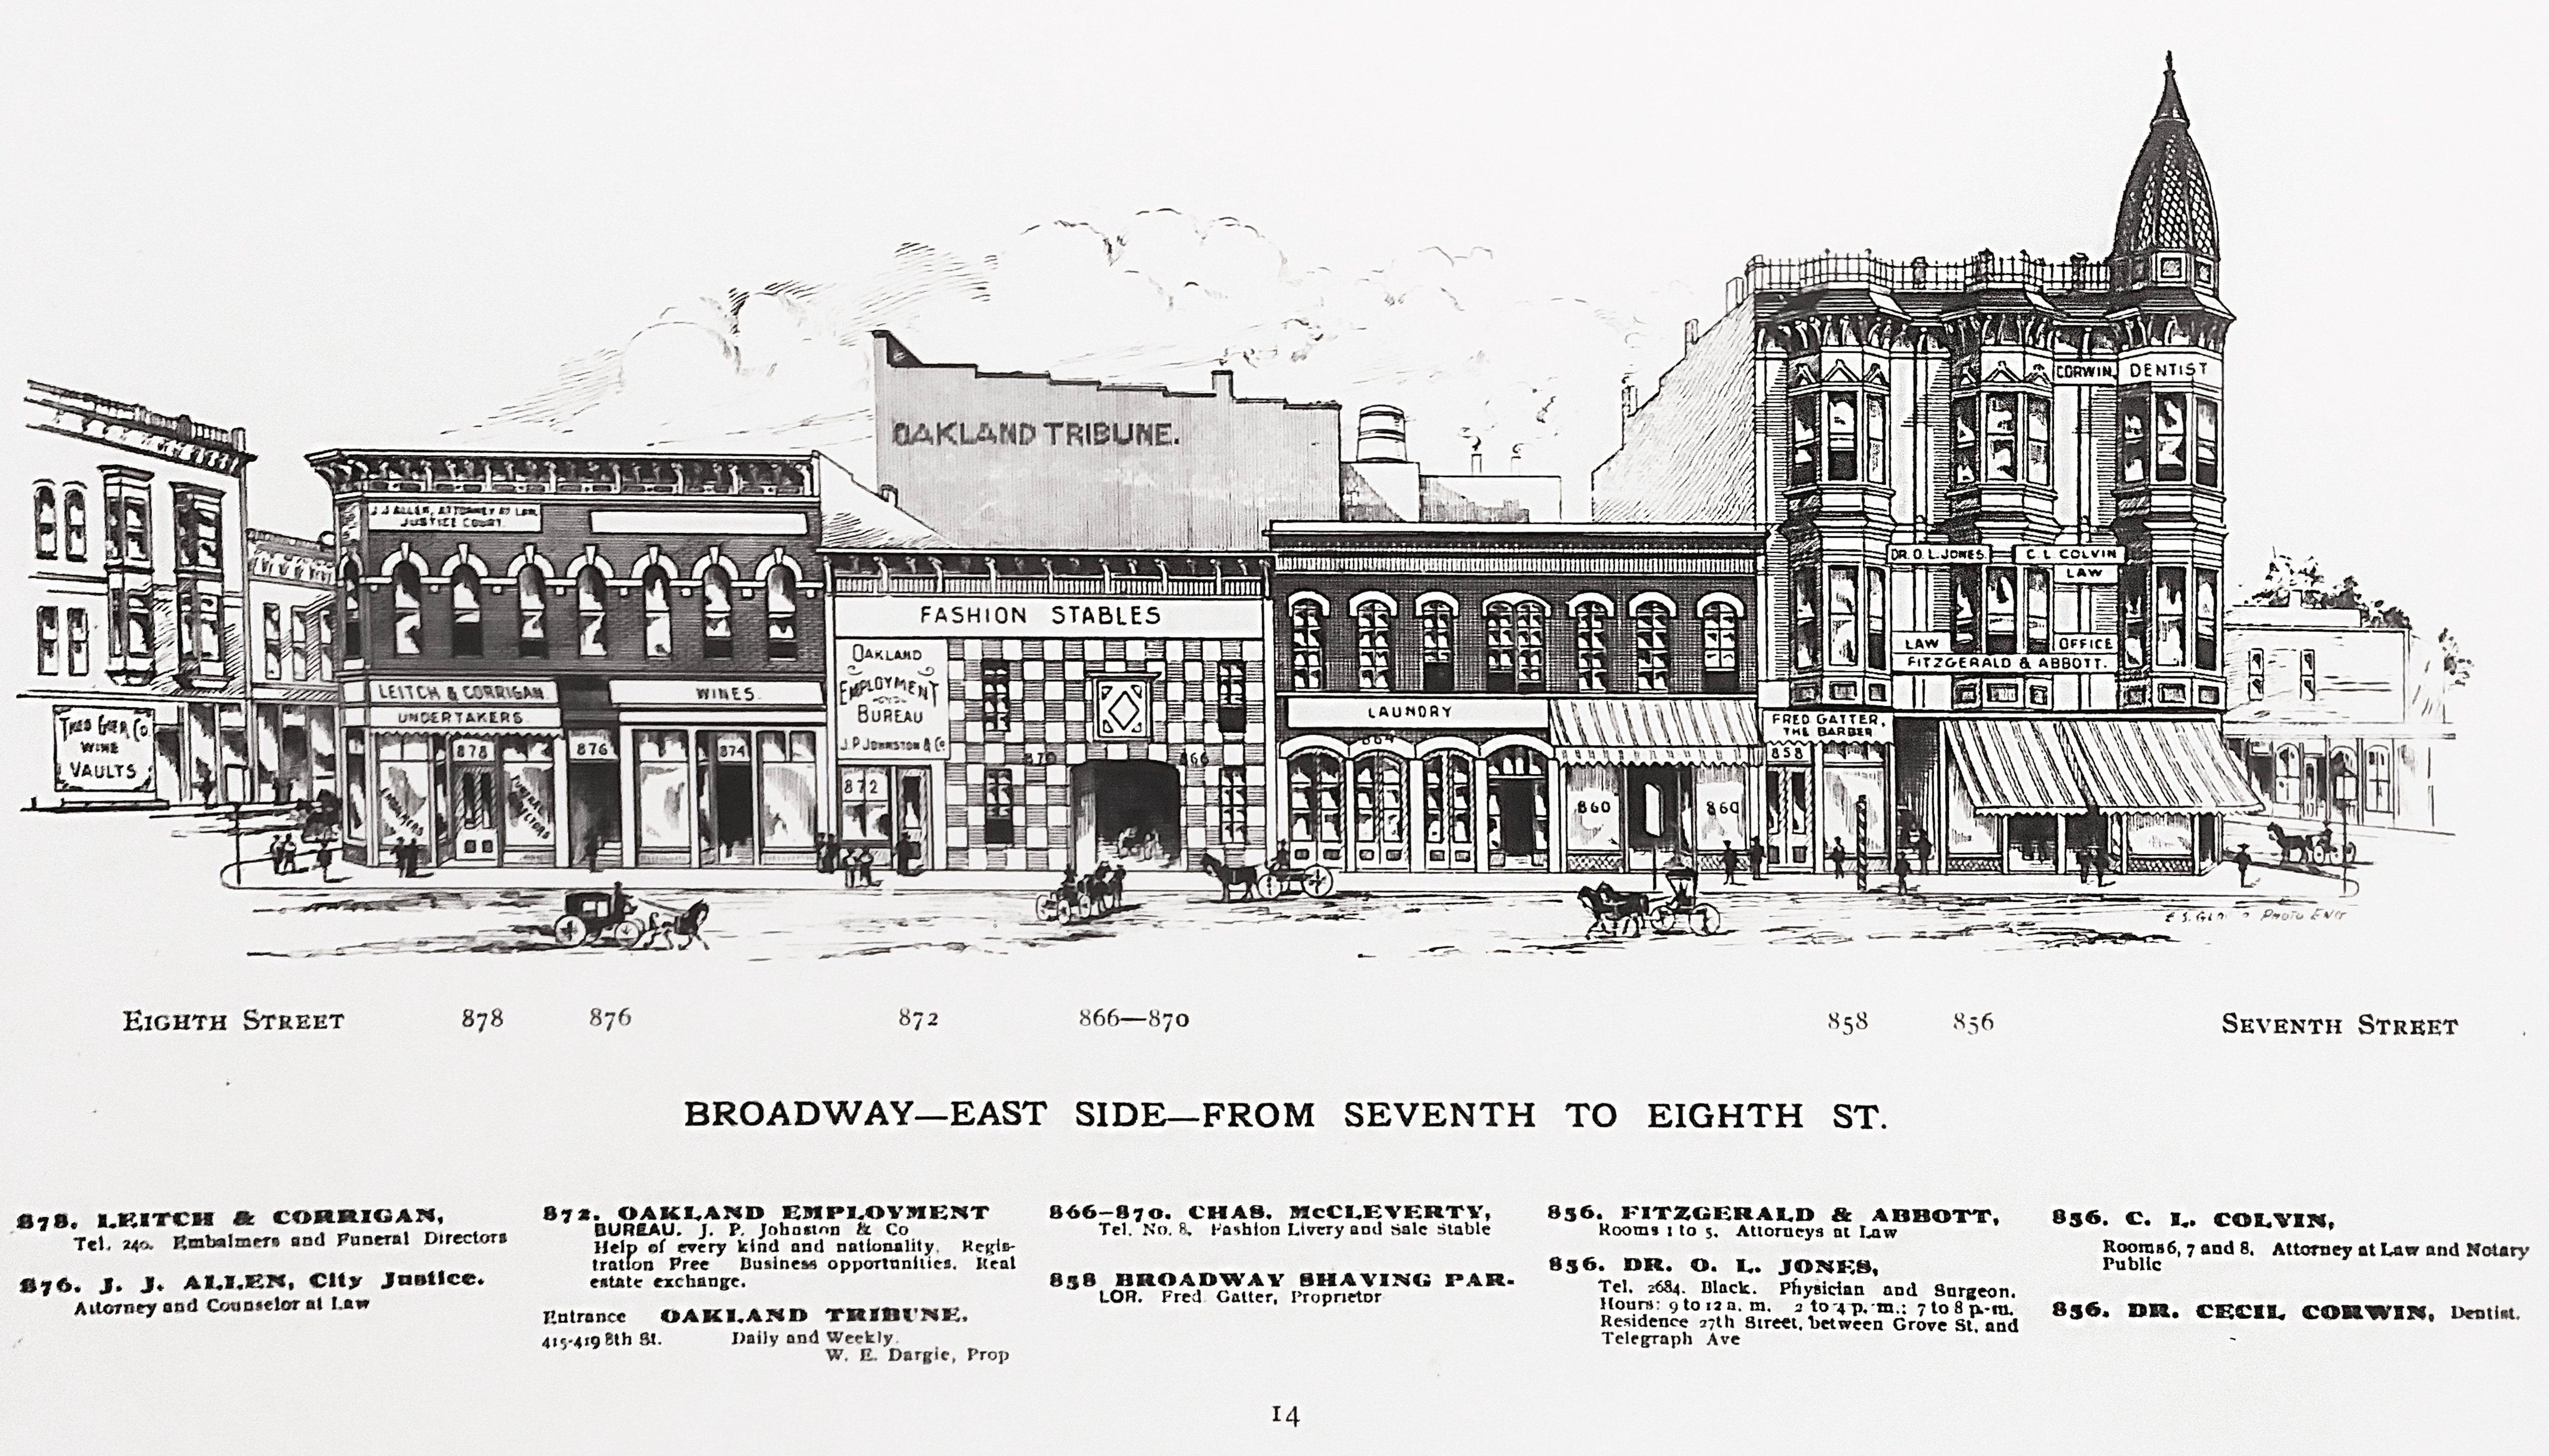 Drawing of 1896 Fitzgerald Abbott Office in Oakland, CA at the corner of Seventh Street and Broadway.